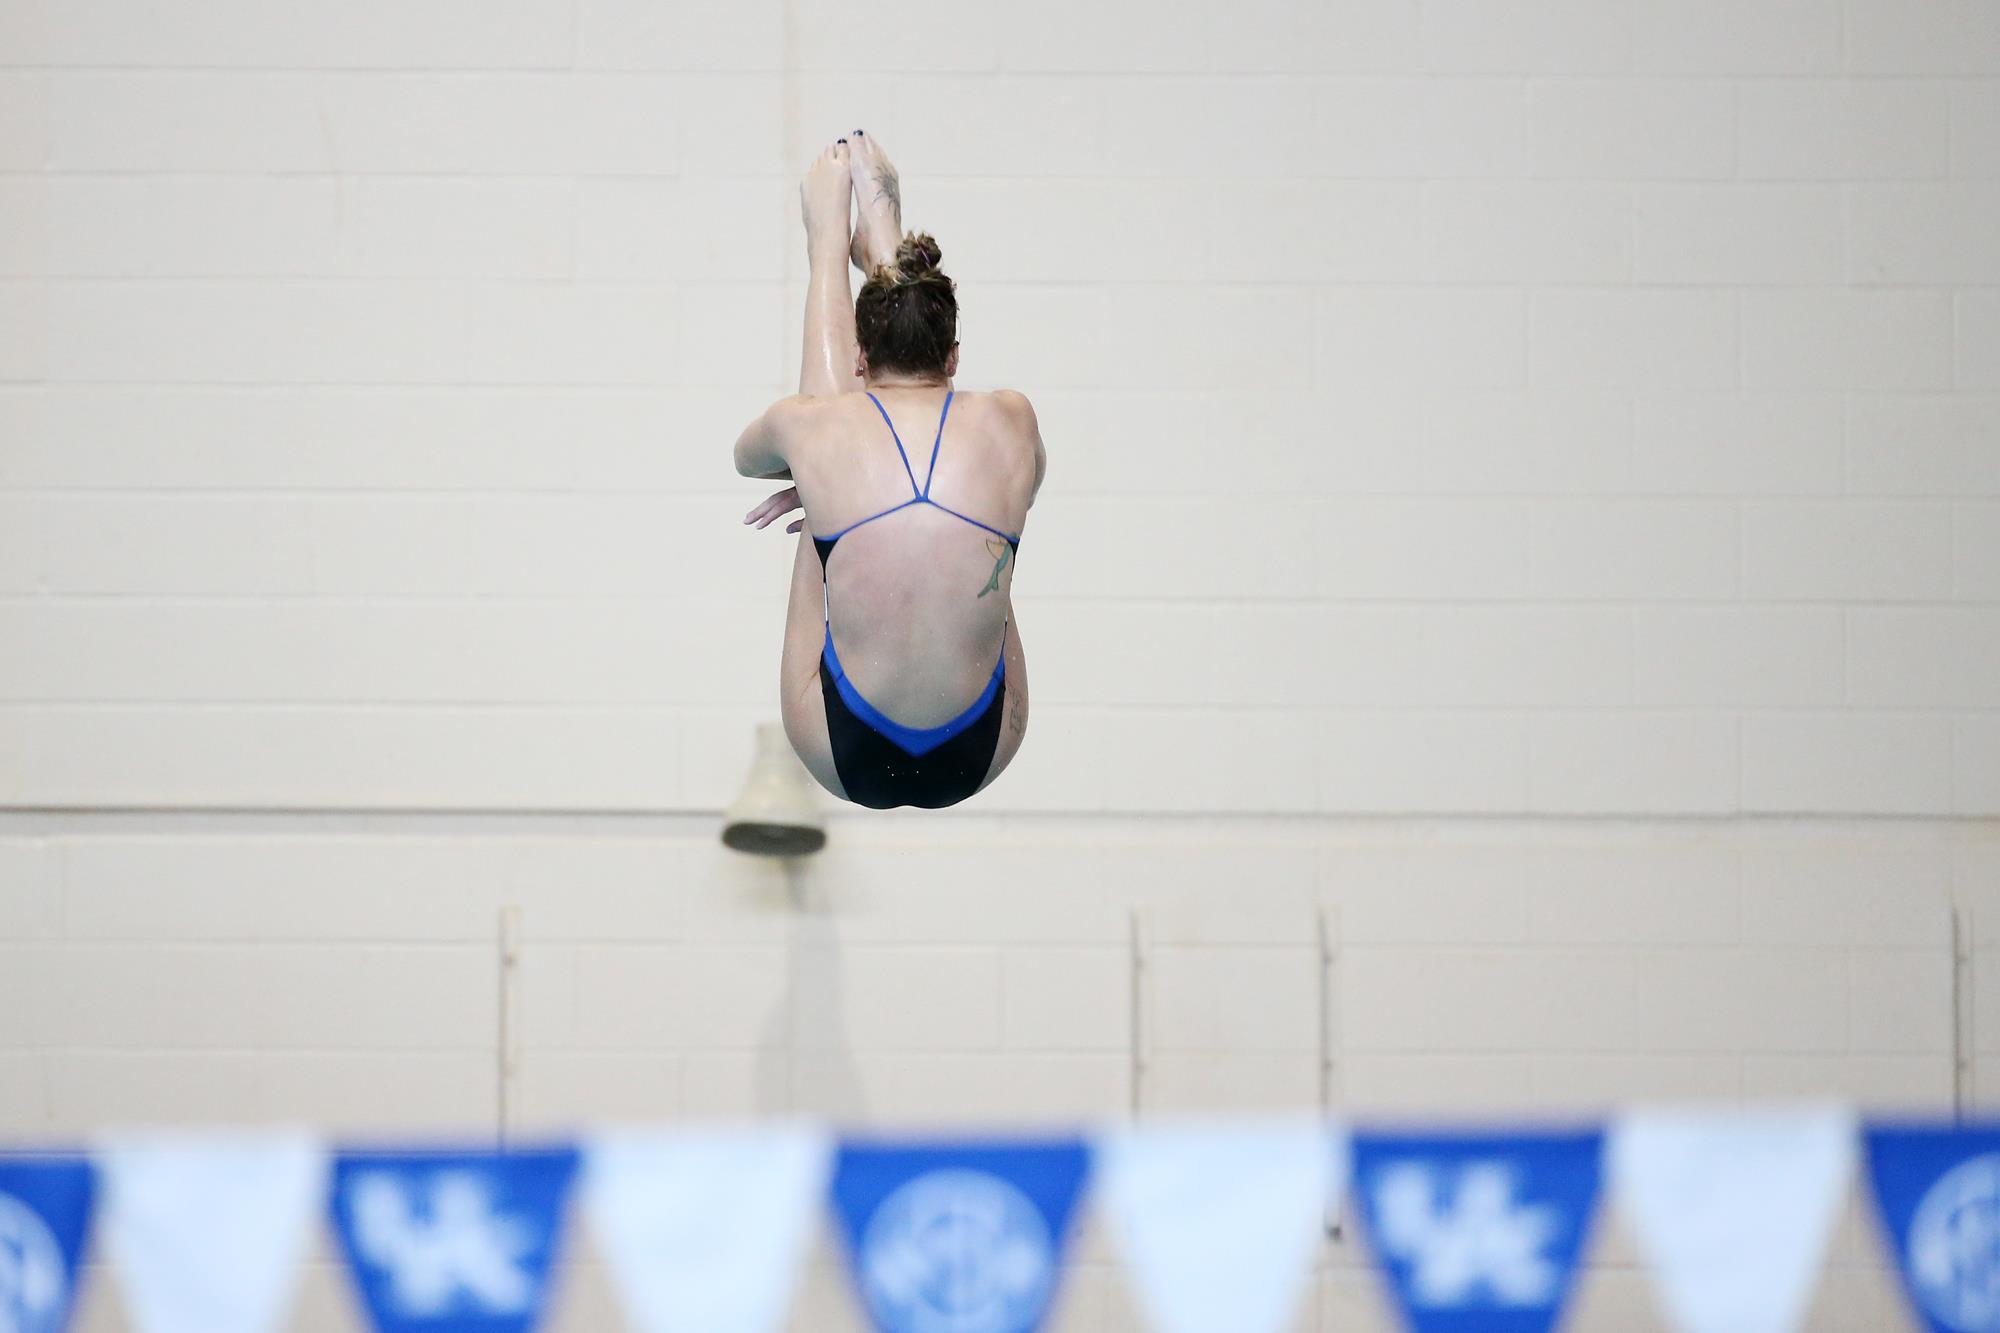 Hamperian Earns Silver on 3-Meter as Cats Wrap U.S. Nationals